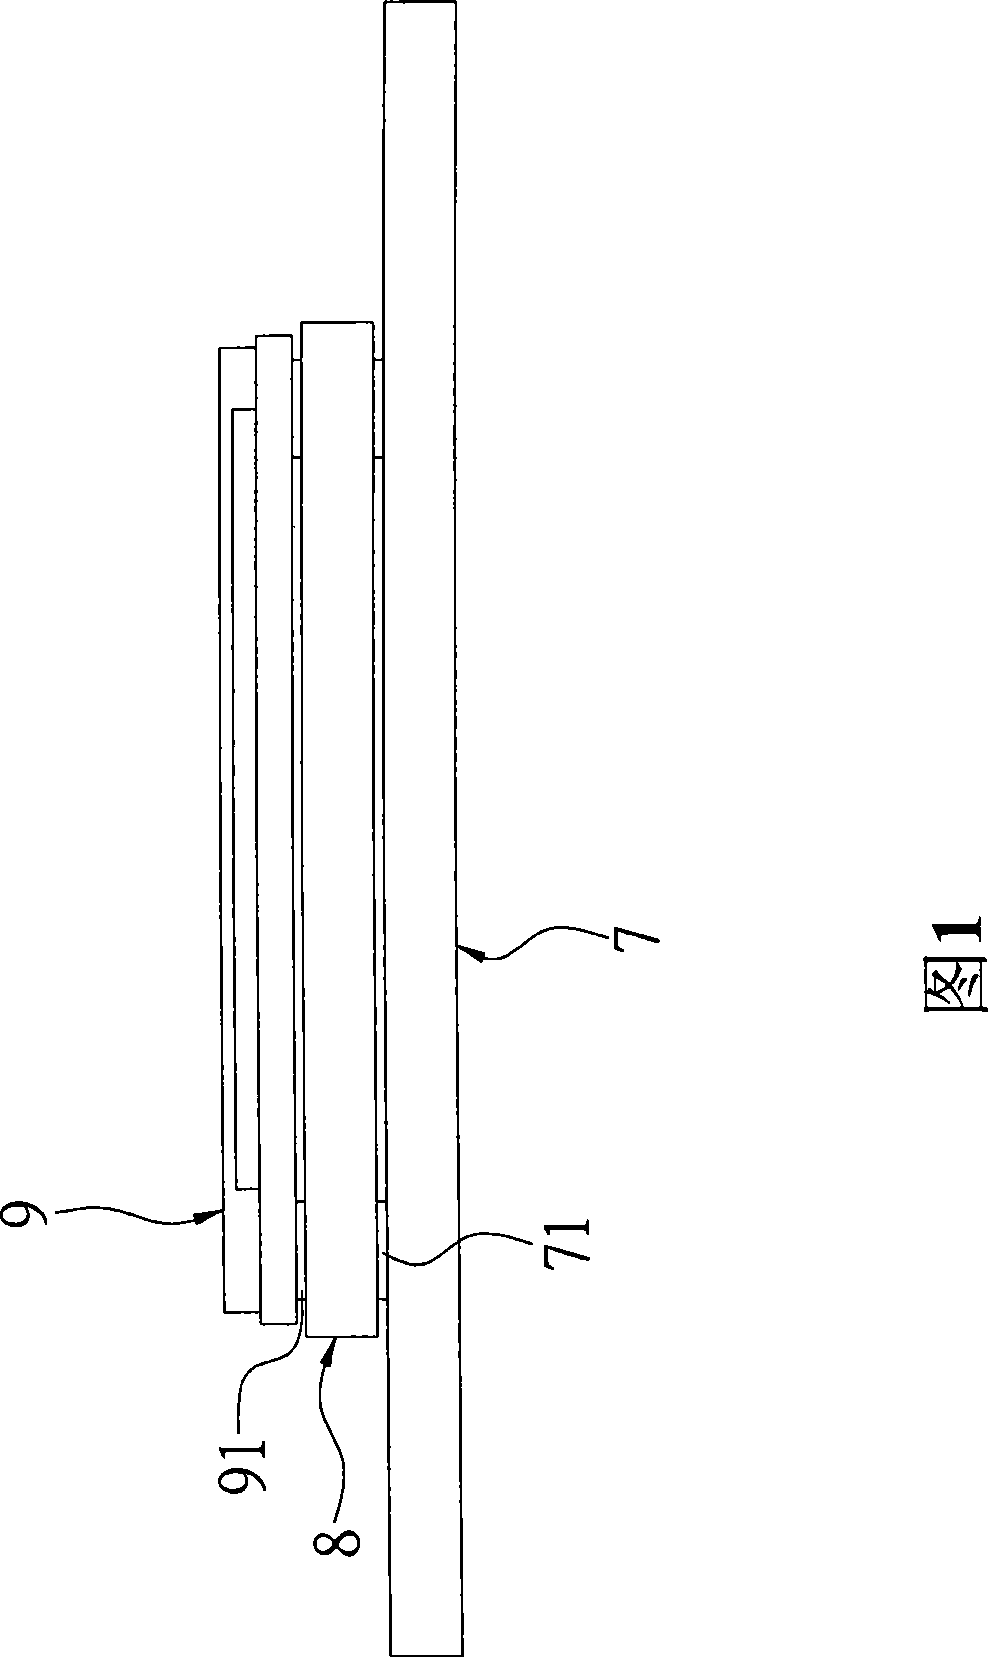 Test method and apparatus for pin element